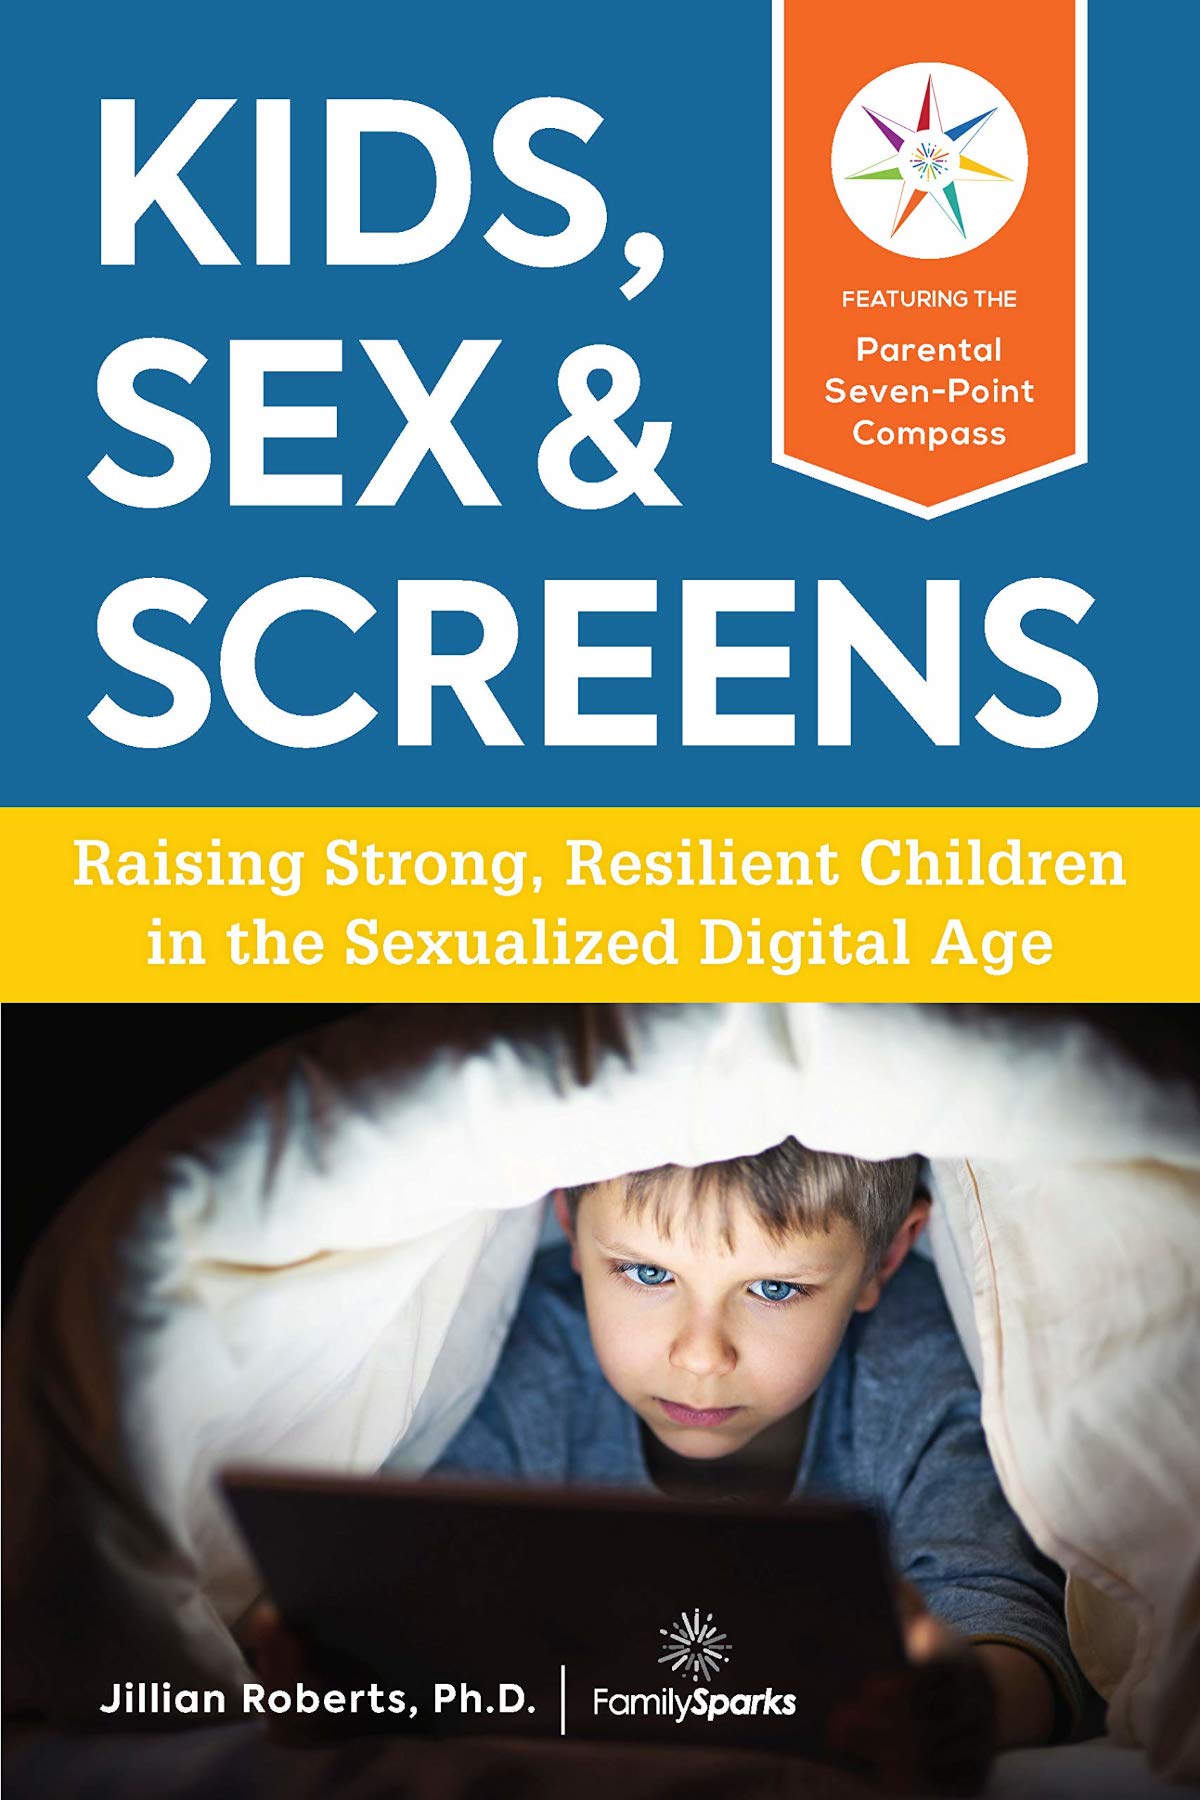 Cover image for Kids, Sex & Screens by Dr. Jillian Roberts